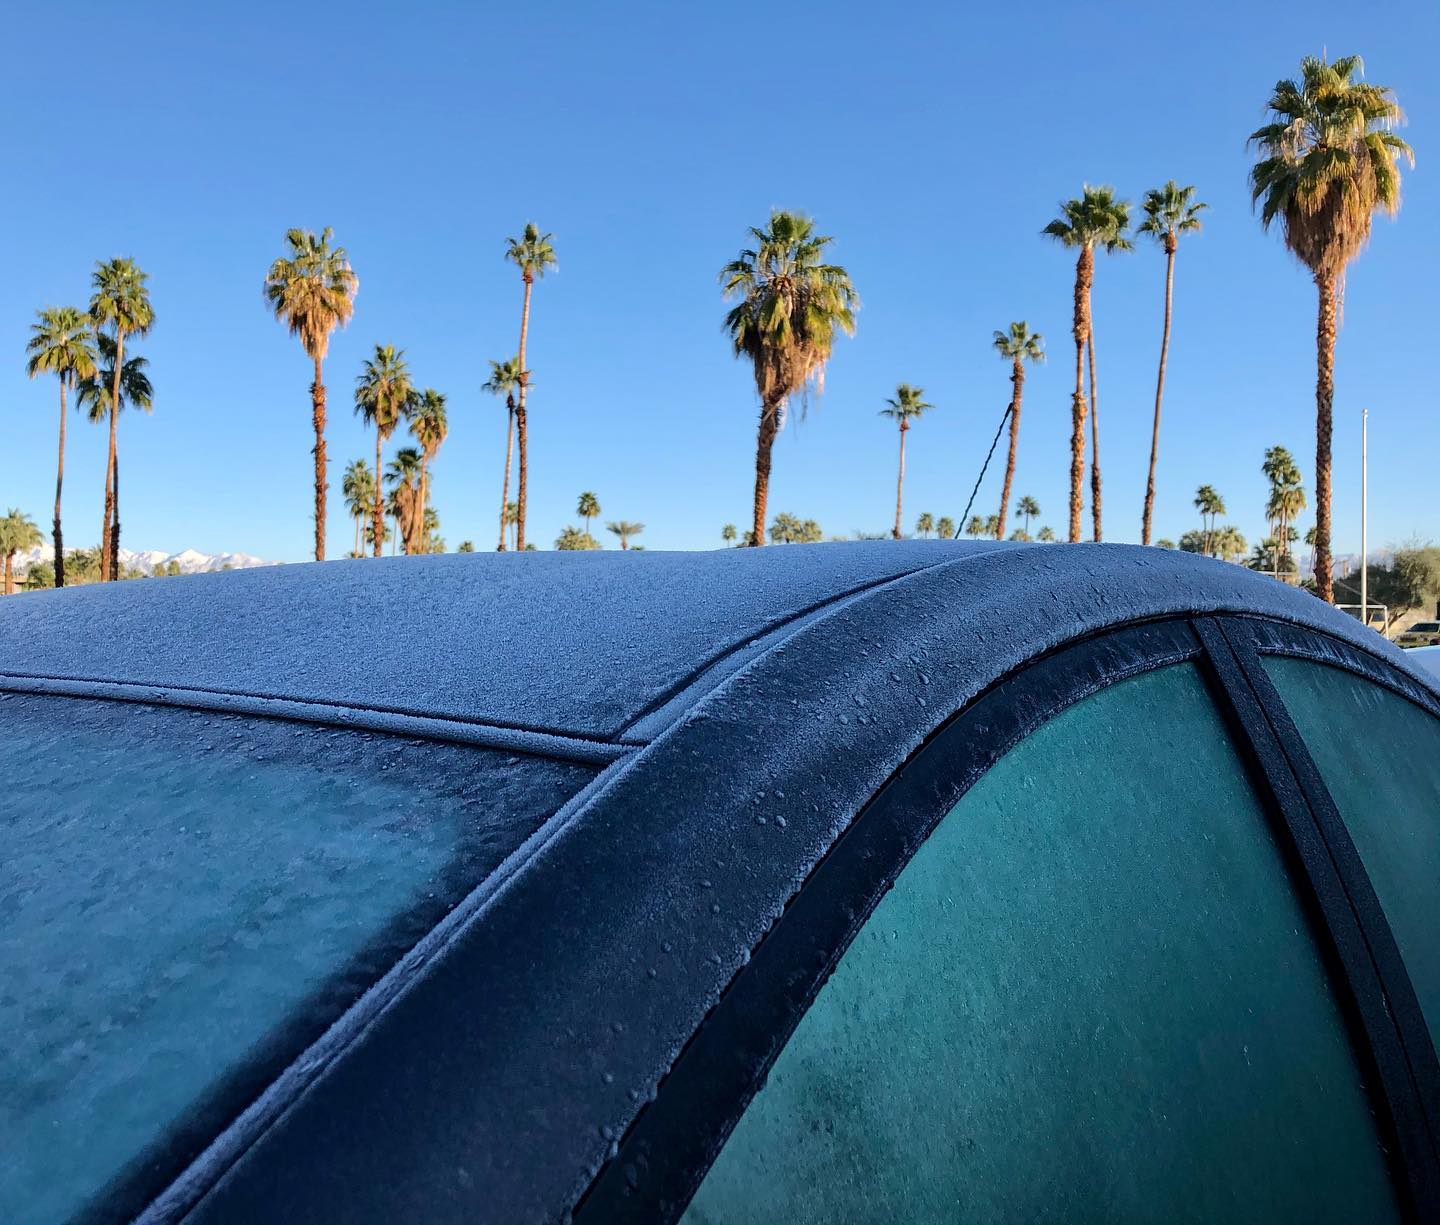 Here’s a new one: defrosting the car in the desert.